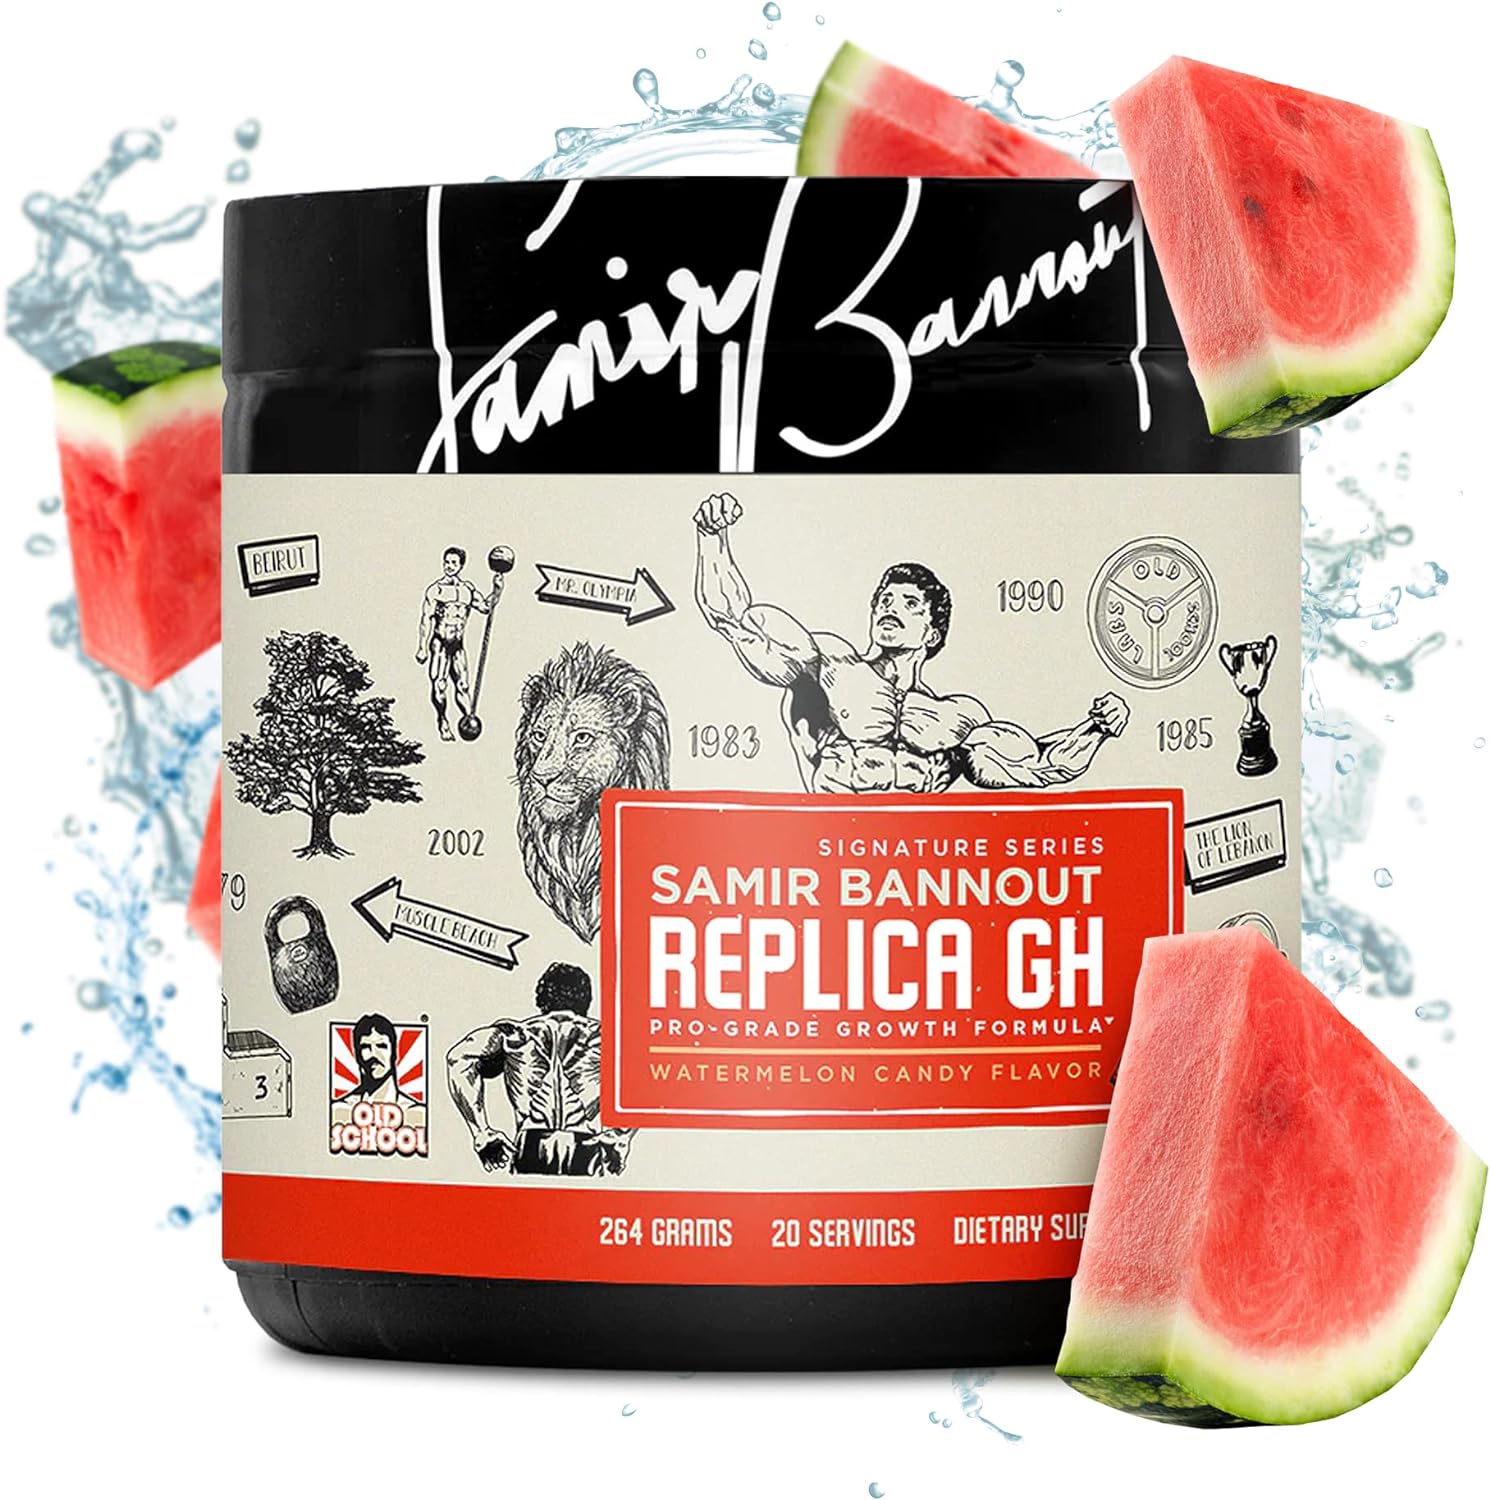 Replica Gh ? Muscle Building GH Boosting Powder ? Hormone Optimizer & Muscle Growth Dietary Supplement ? Exclusive OSL Mr. Olympia Samir Bannout Collaboration ? Watermelon Candy Flavor ? 20 Servings